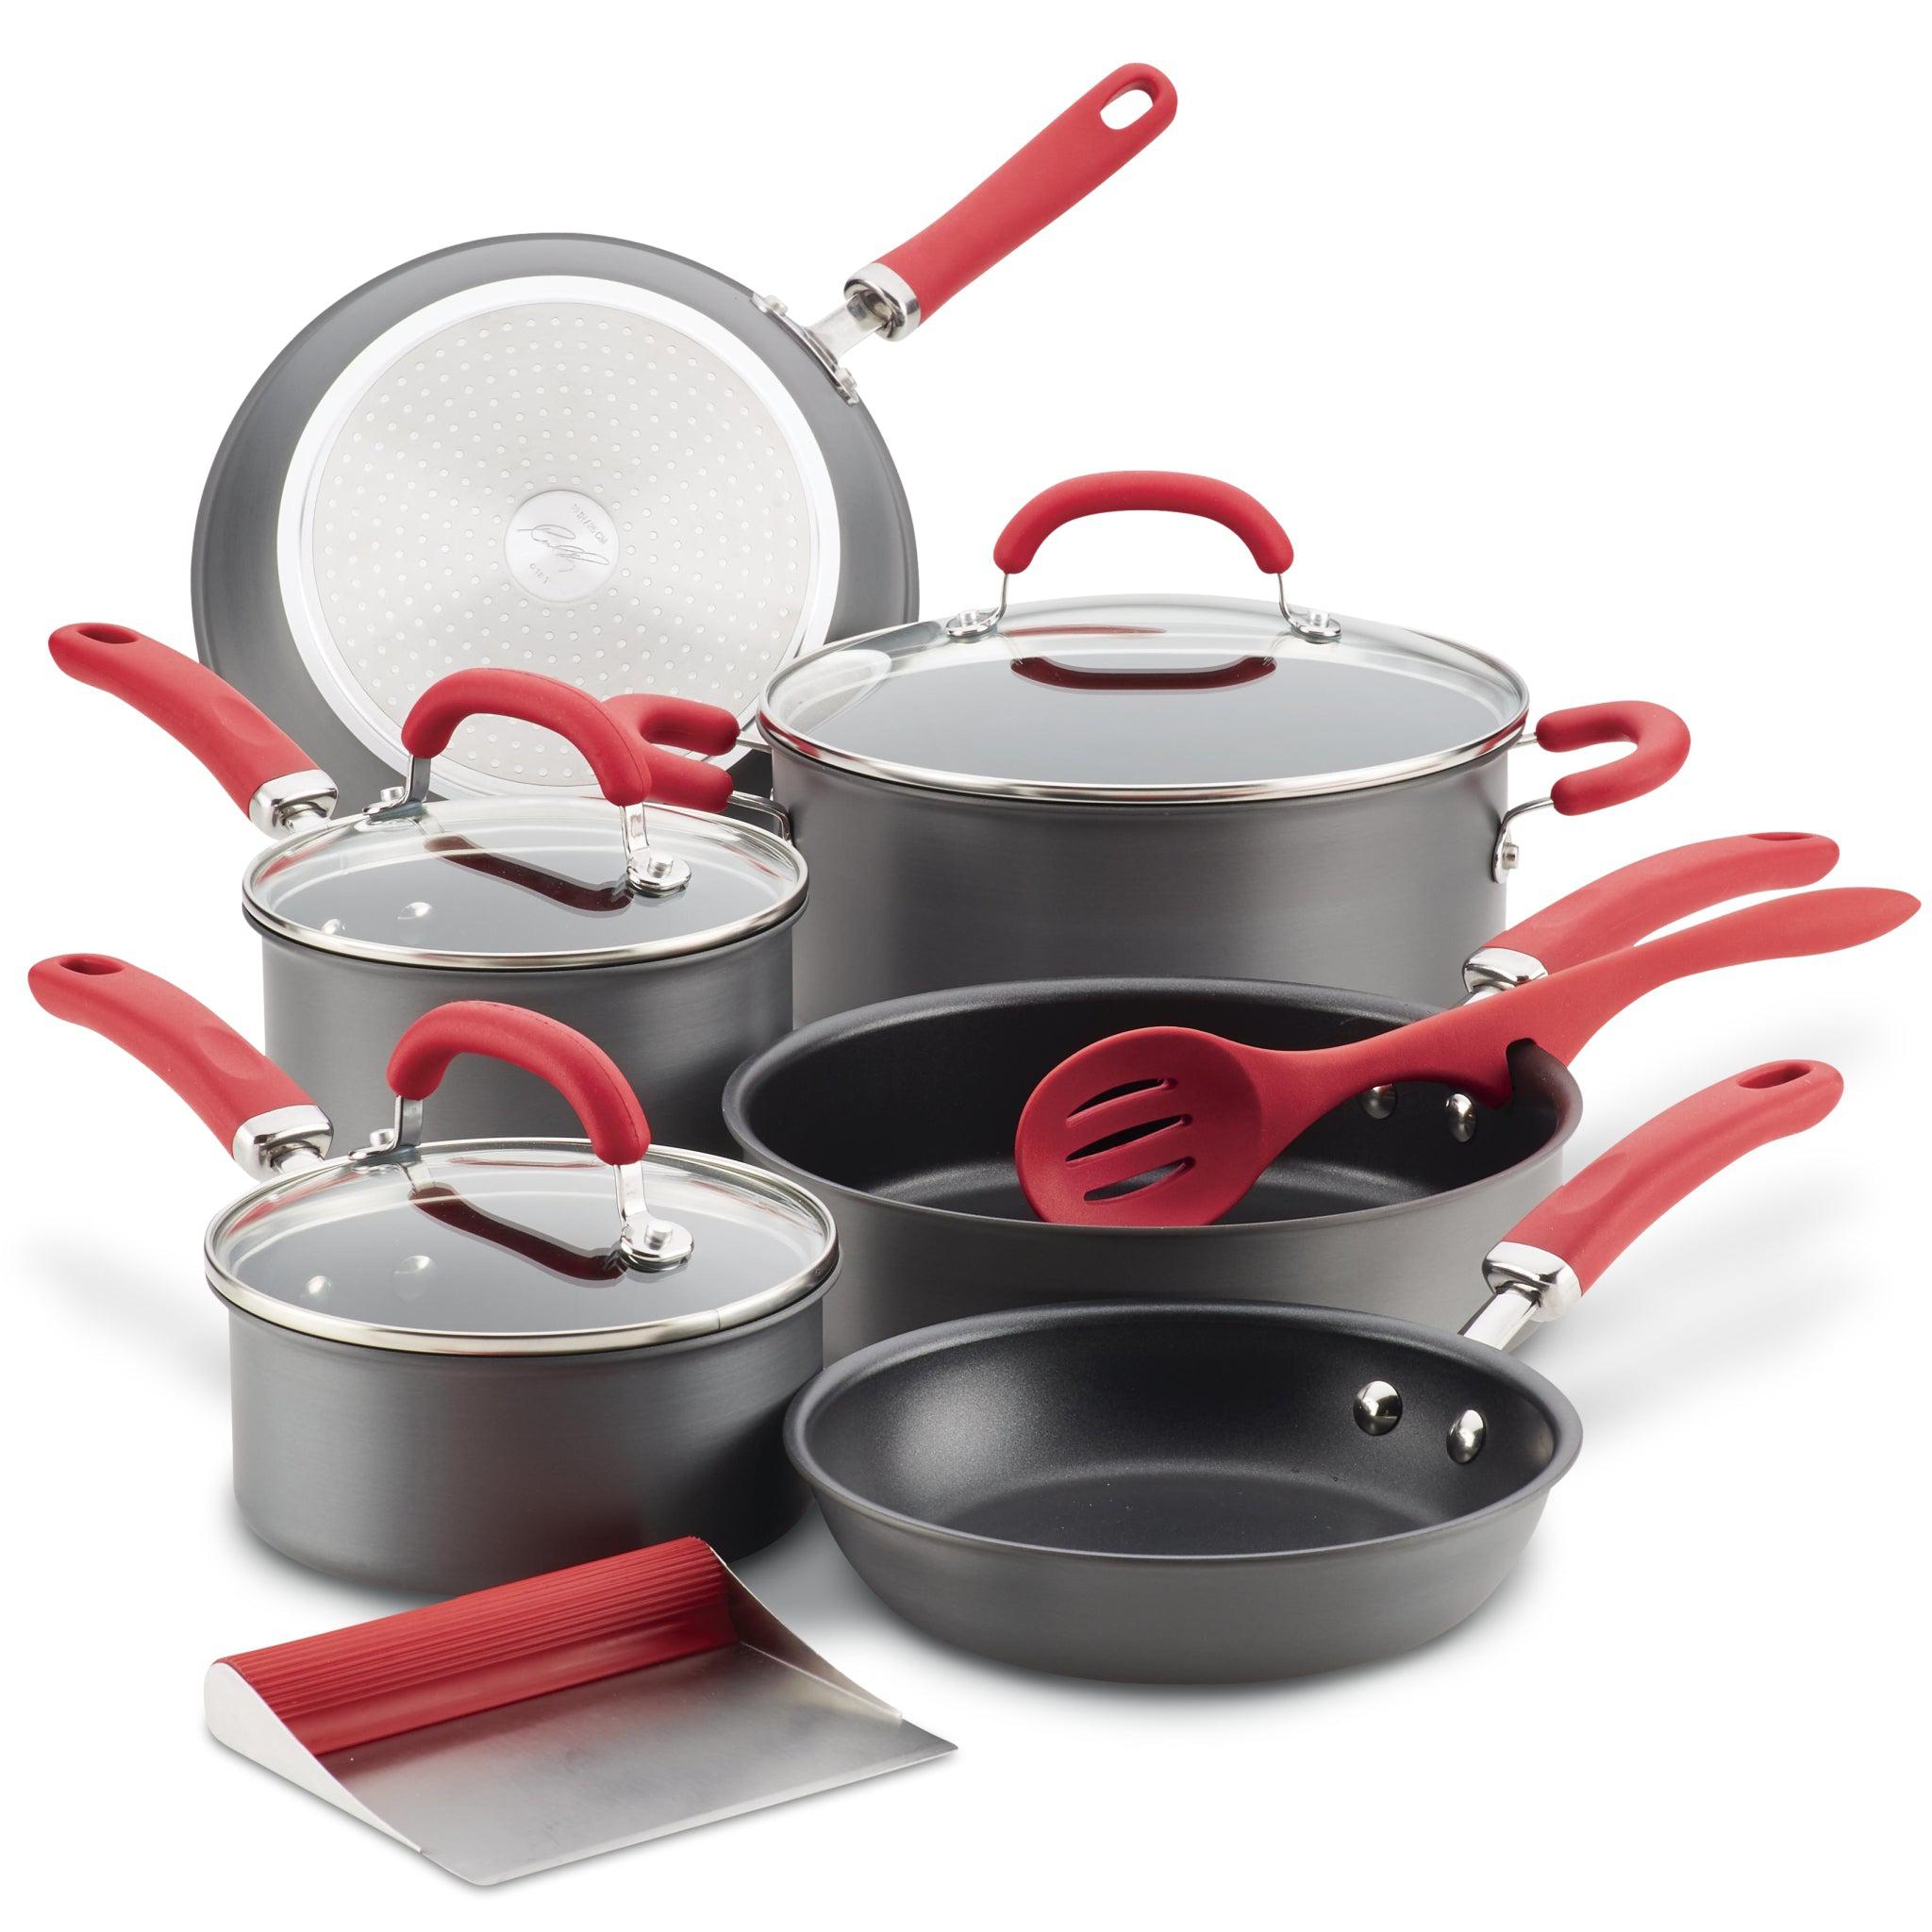 Rachael Ray Stainless Steel and Hard Anodized Nonstick Cookware Induction Pots and Pans Set, 11-Piece